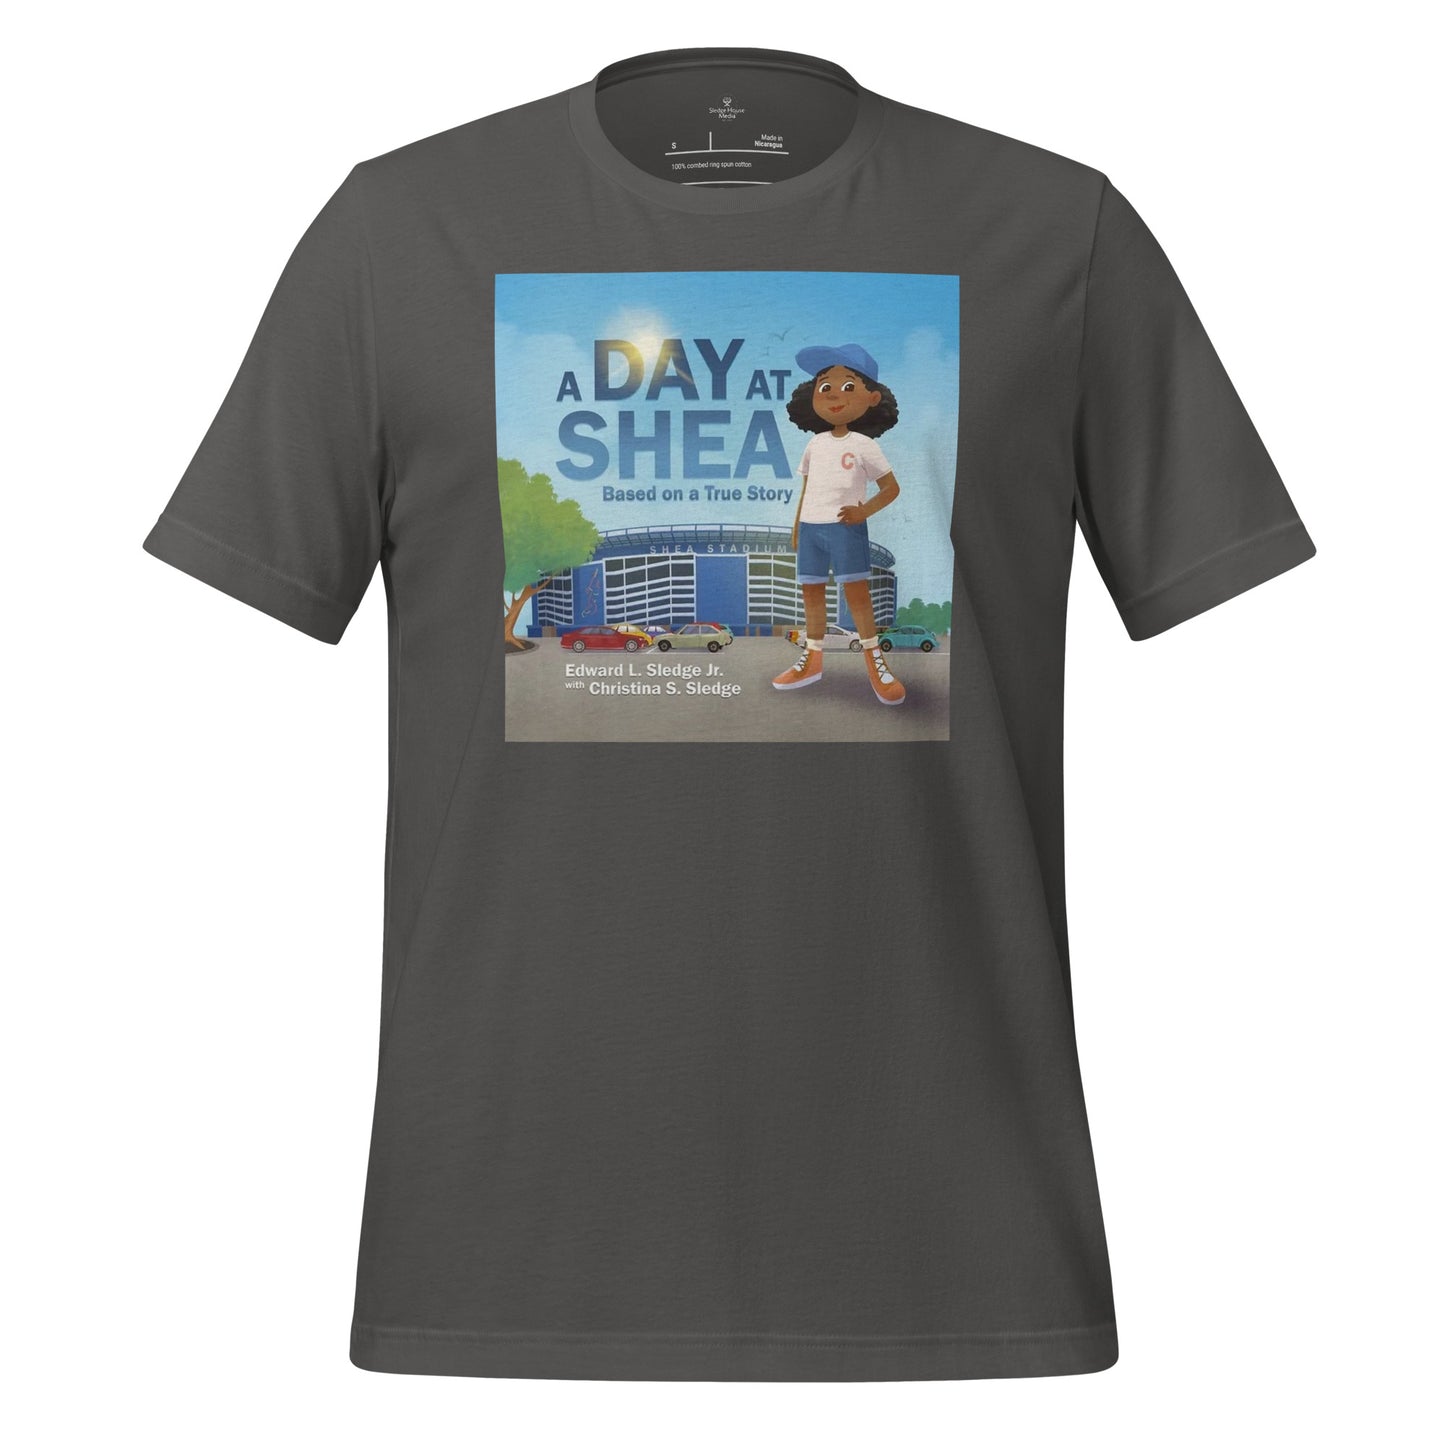 A Day at Shea Adult Unisex Graphic T-Shirt